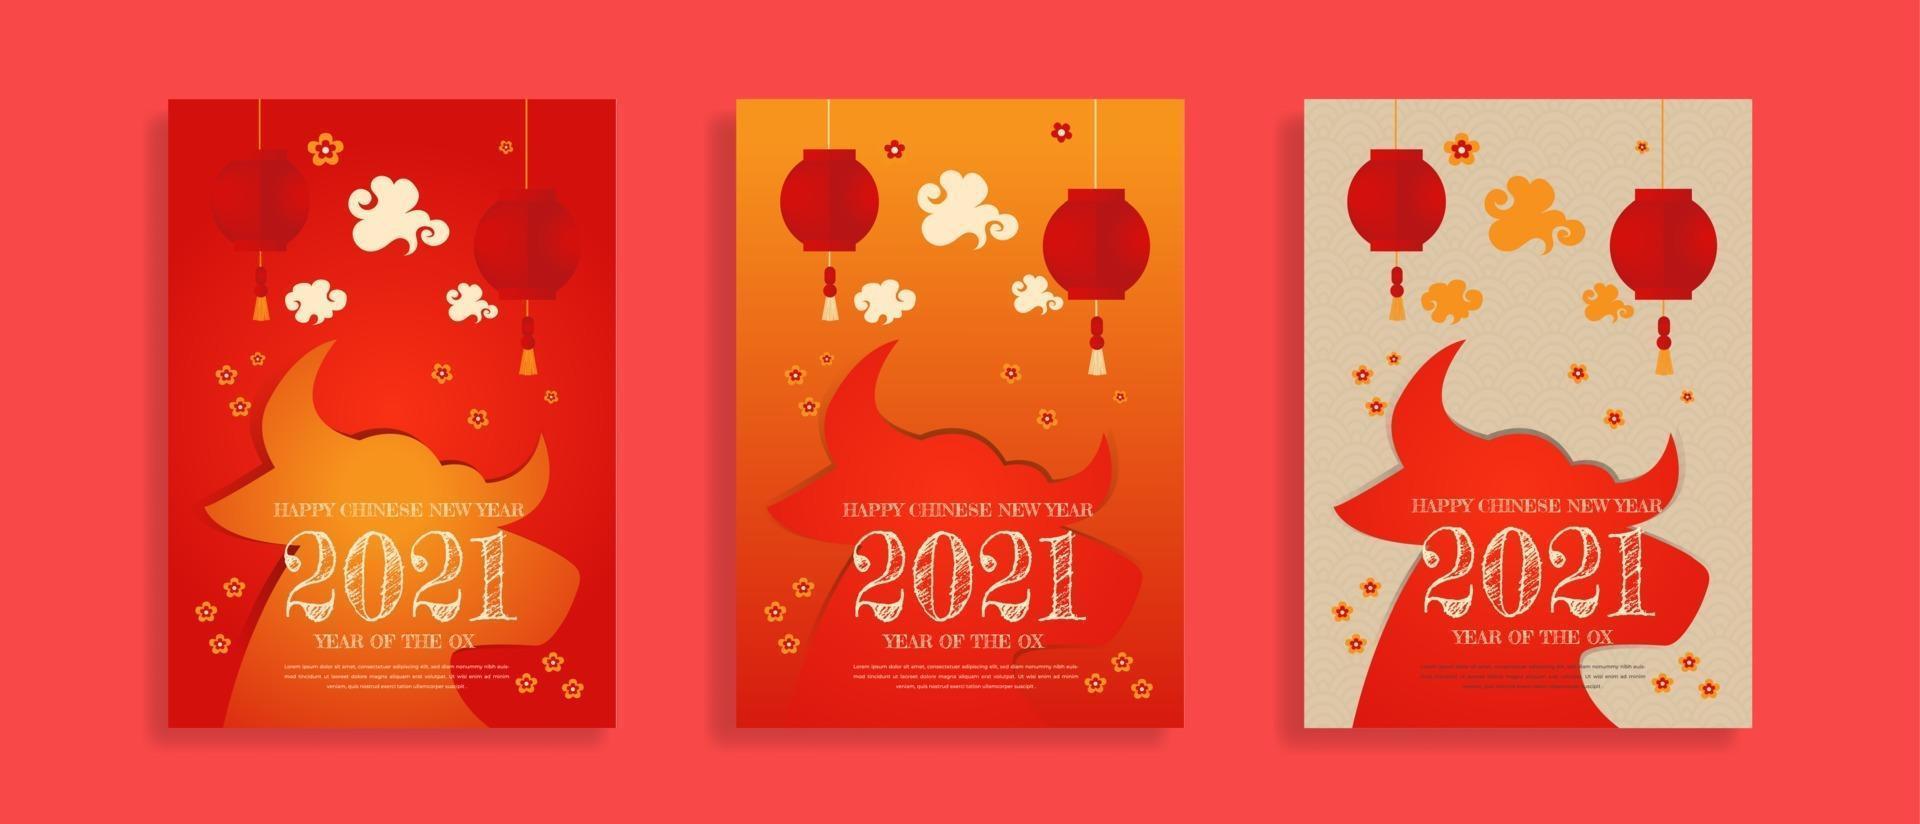 Chinese new year 2021 year of the ox Chinese zodiac symbol cards vector